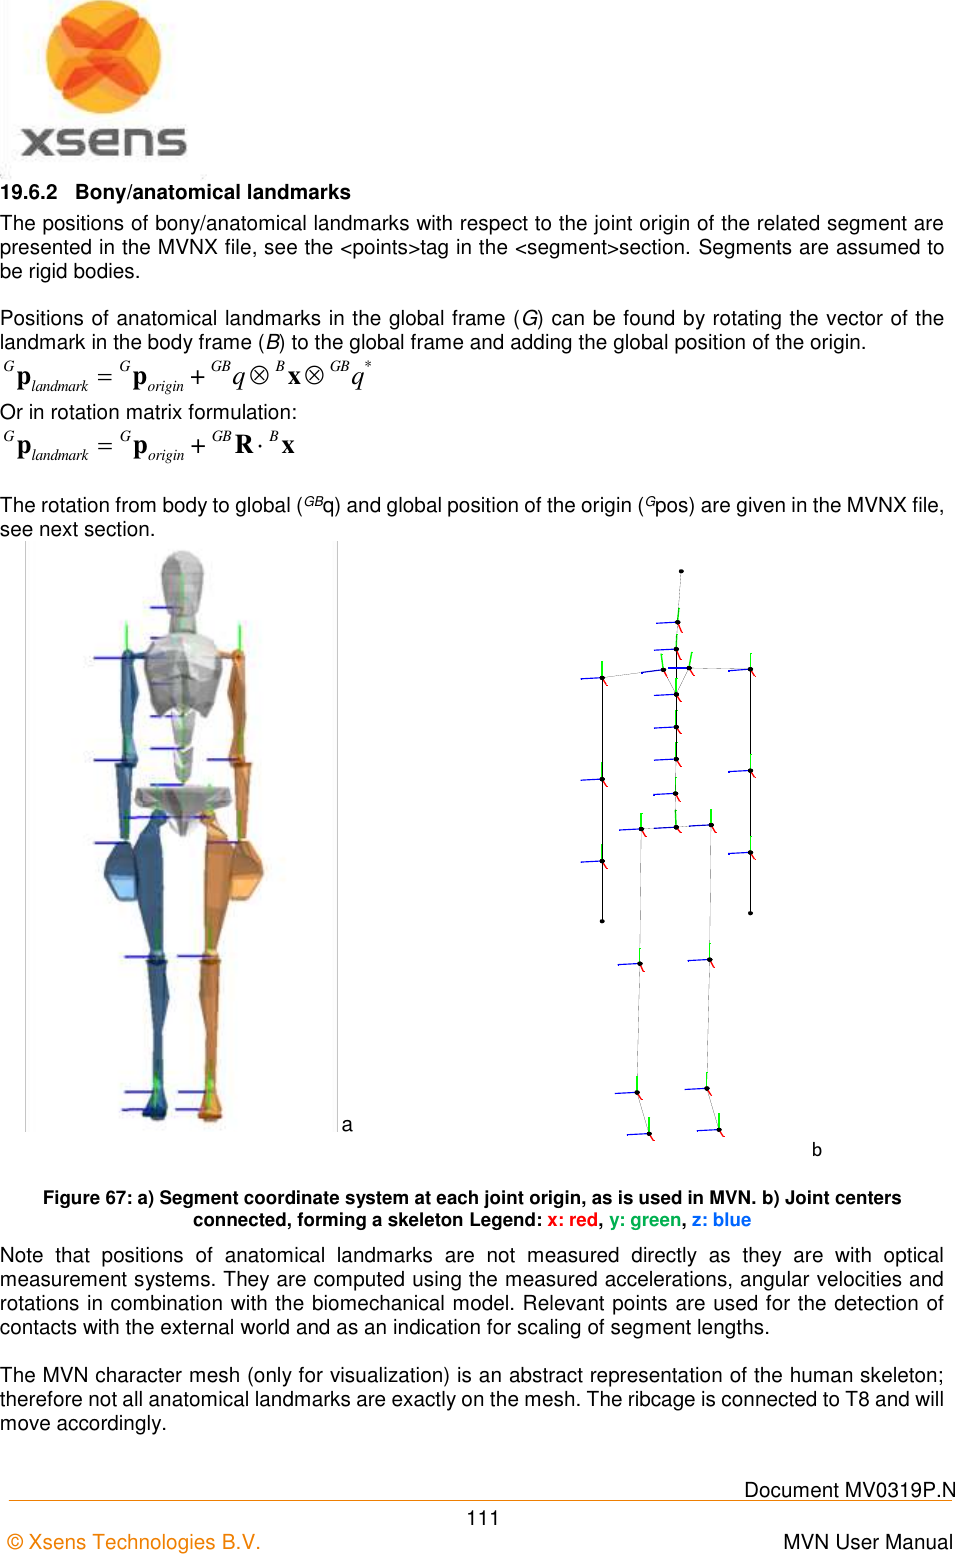    Document MV0319P.N © Xsens Technologies B.V.      MVN User Manual  111 19.6.2  Bony/anatomical landmarks The positions of bony/anatomical landmarks with respect to the joint origin of the related segment are presented in the MVNX file, see the &lt;points&gt;tag in the &lt;segment&gt;section. Segments are assumed to be rigid bodies.  Positions of anatomical landmarks in the global frame (G) can be found by rotating the vector of the landmark in the body frame (B) to the global frame and adding the global position of the origin. *G G GB B GBlandmark origin + q q  p p x Or in rotation matrix formulation: G G GB Blandmark origin +p p R x  The rotation from body to global (GBq) and global position of the origin (Gpos) are given in the MVNX file, see next section. a b Figure 67: a) Segment coordinate system at each joint origin, as is used in MVN. b) Joint centers connected, forming a skeleton Legend: x: red, y: green, z: blue Note  that  positions  of  anatomical  landmarks  are  not  measured  directly  as  they  are  with  optical measurement systems. They are computed using the measured accelerations, angular velocities and rotations in combination with the biomechanical model. Relevant points are used for the detection of contacts with the external world and as an indication for scaling of segment lengths.  The MVN character mesh (only for visualization) is an abstract representation of the human skeleton; therefore not all anatomical landmarks are exactly on the mesh. The ribcage is connected to T8 and will move accordingly. 